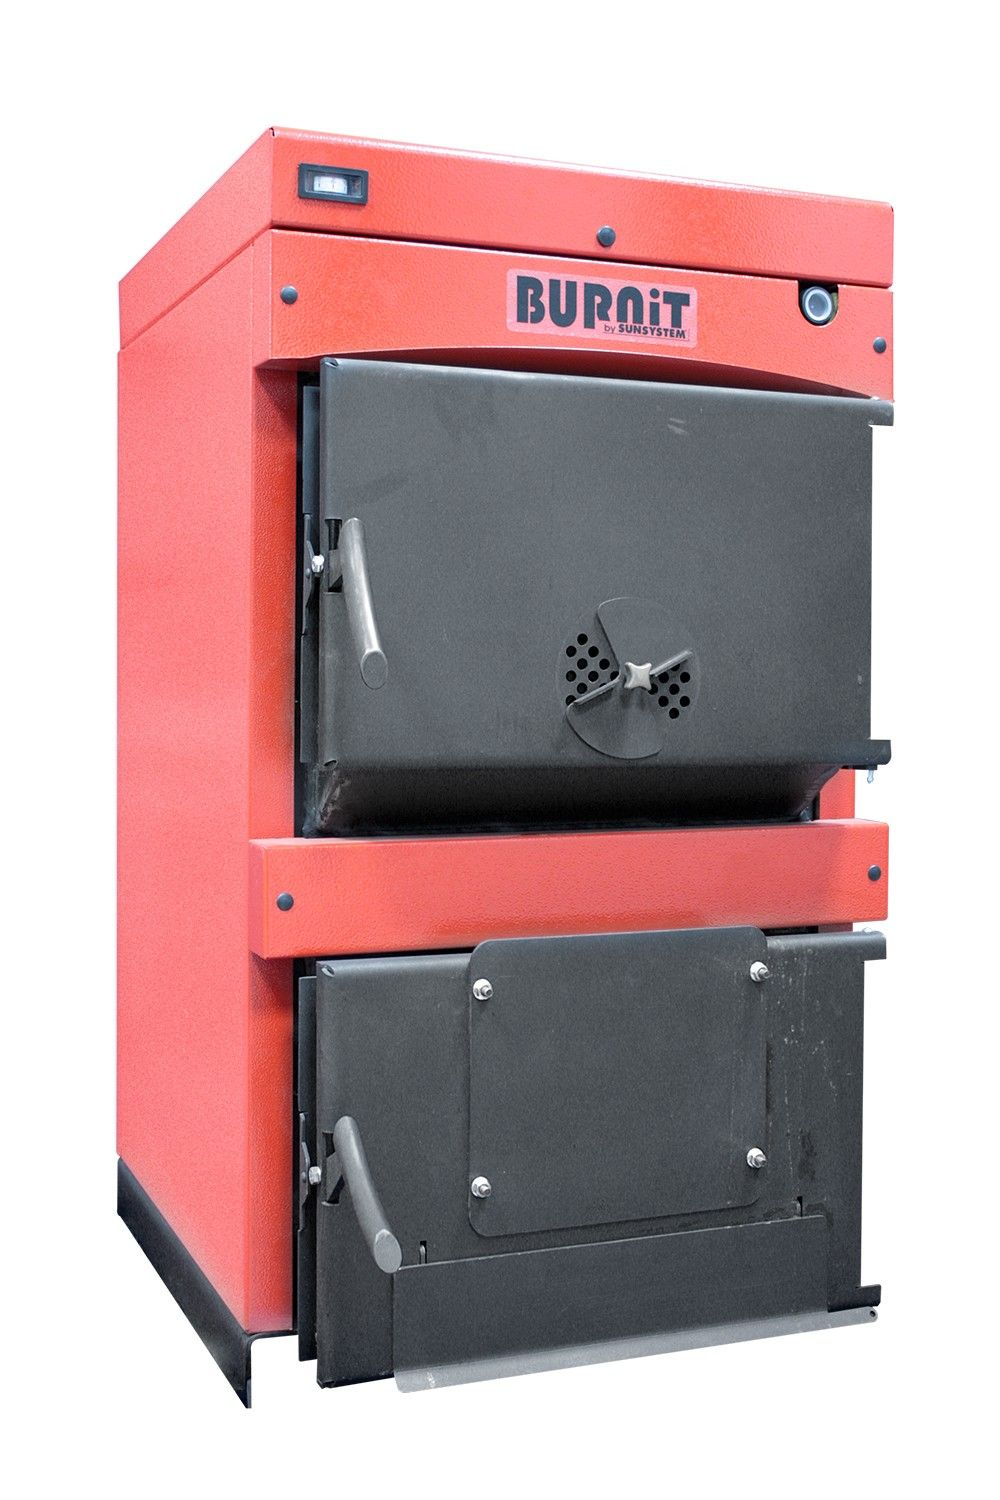 BURNiT WBS 110 kW solid fuel boiler